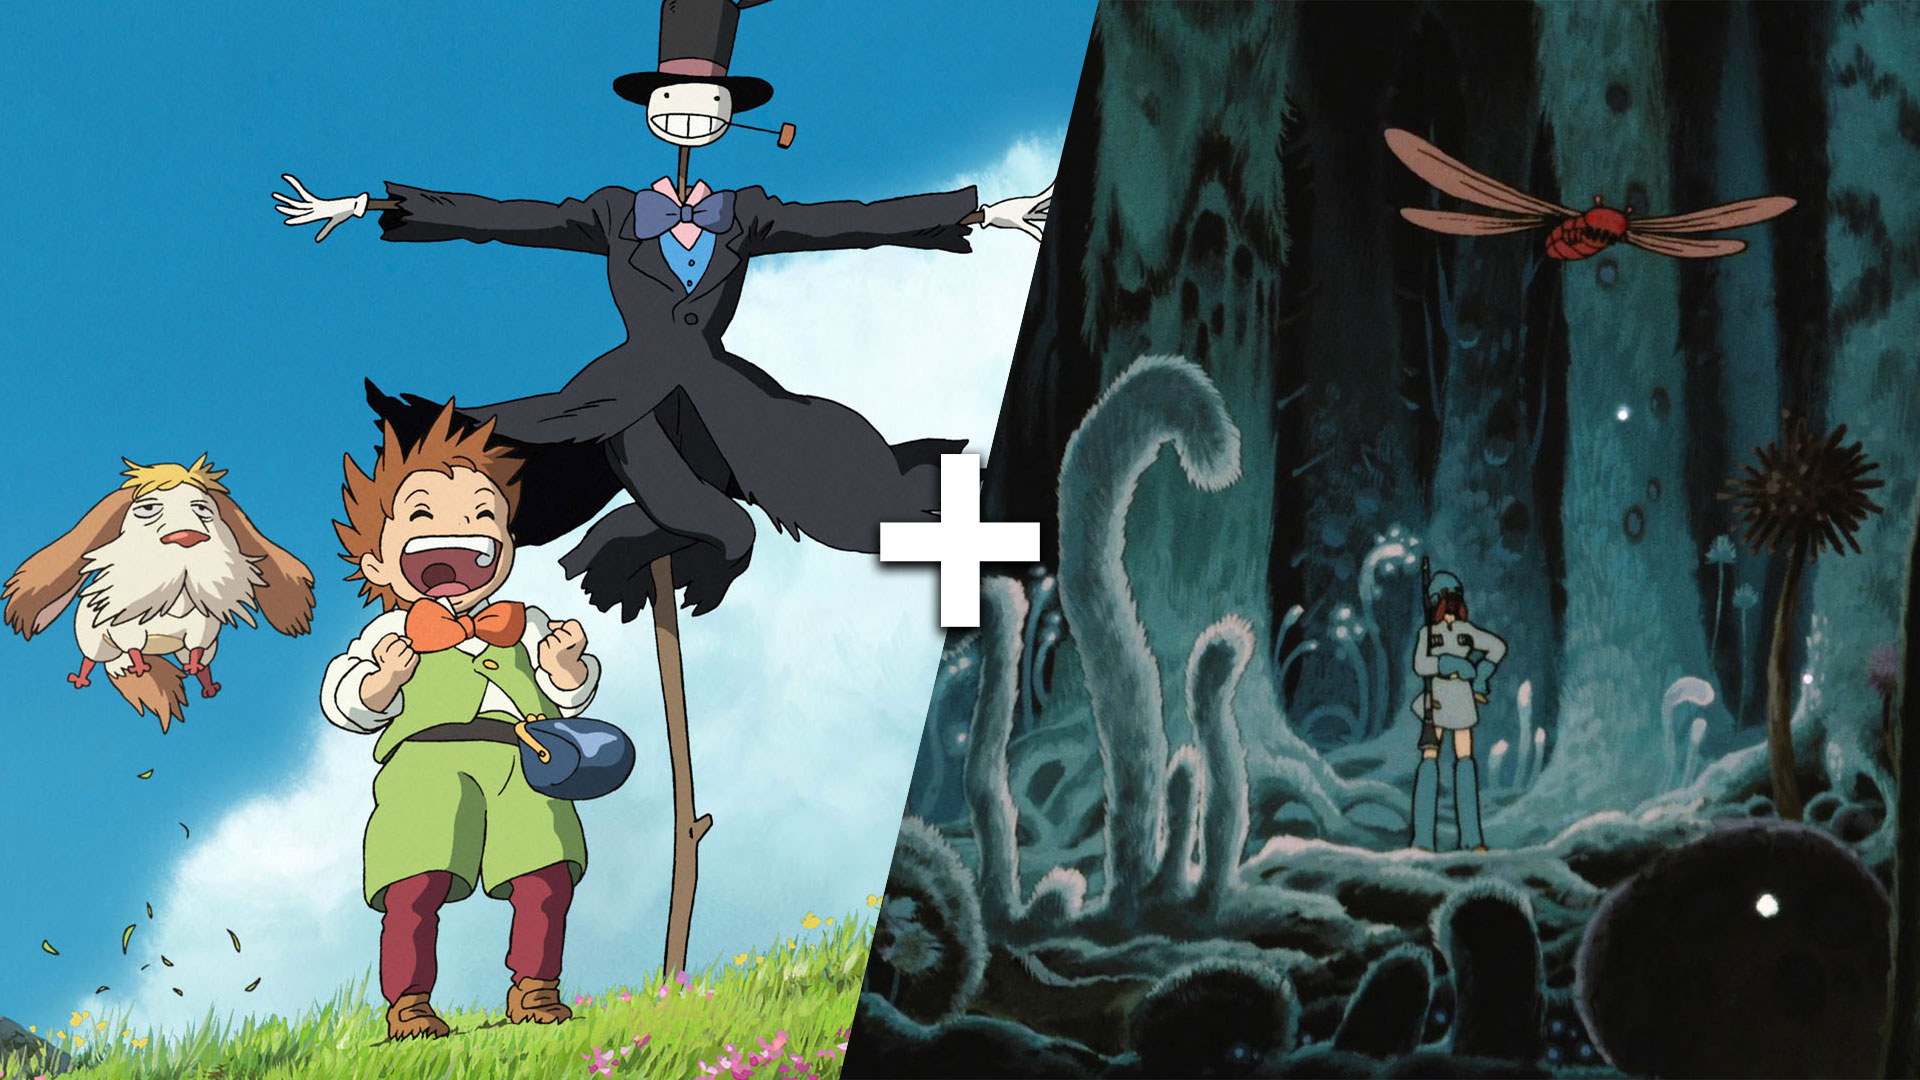 Howl's Moving Castle + Nausicaä of the Valley of